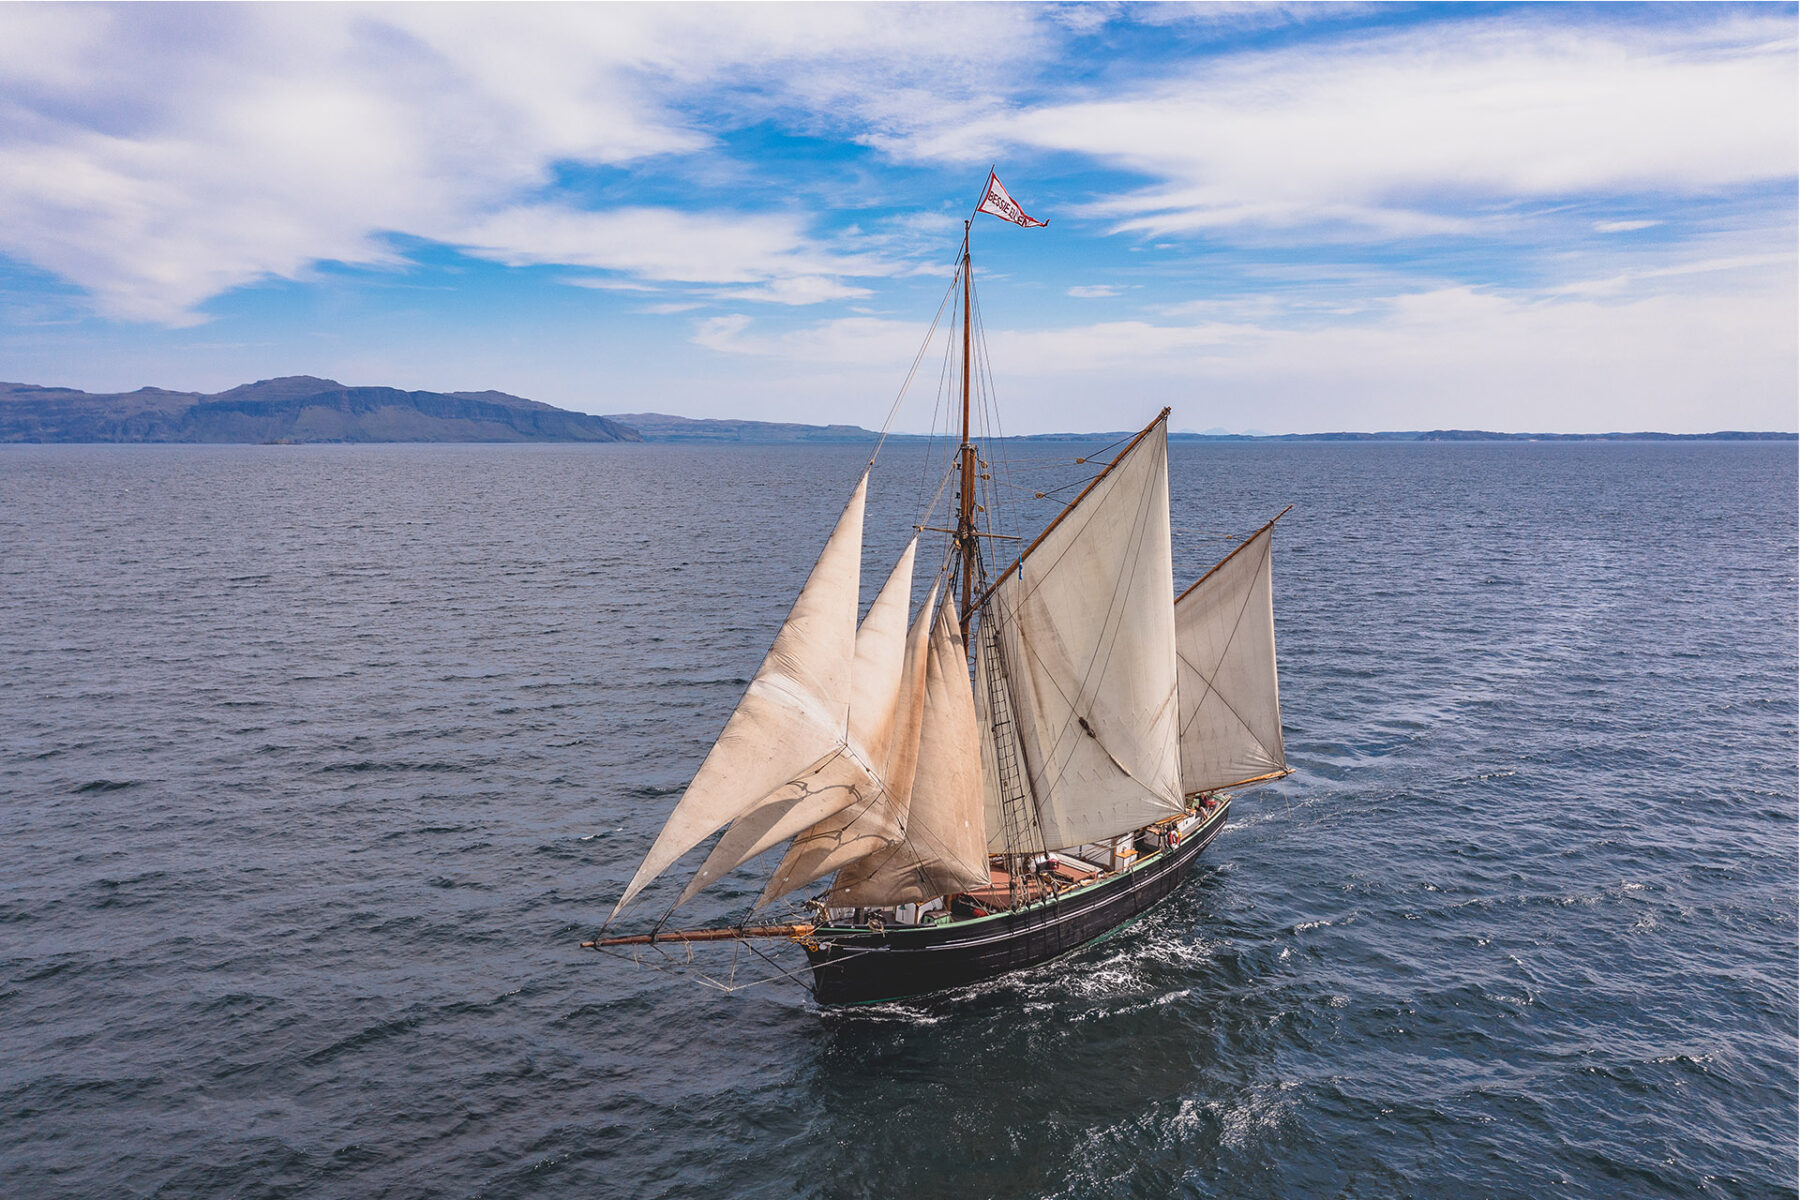 Sailing Holidays aboard classic ship Bessie with VentureSail Holidays